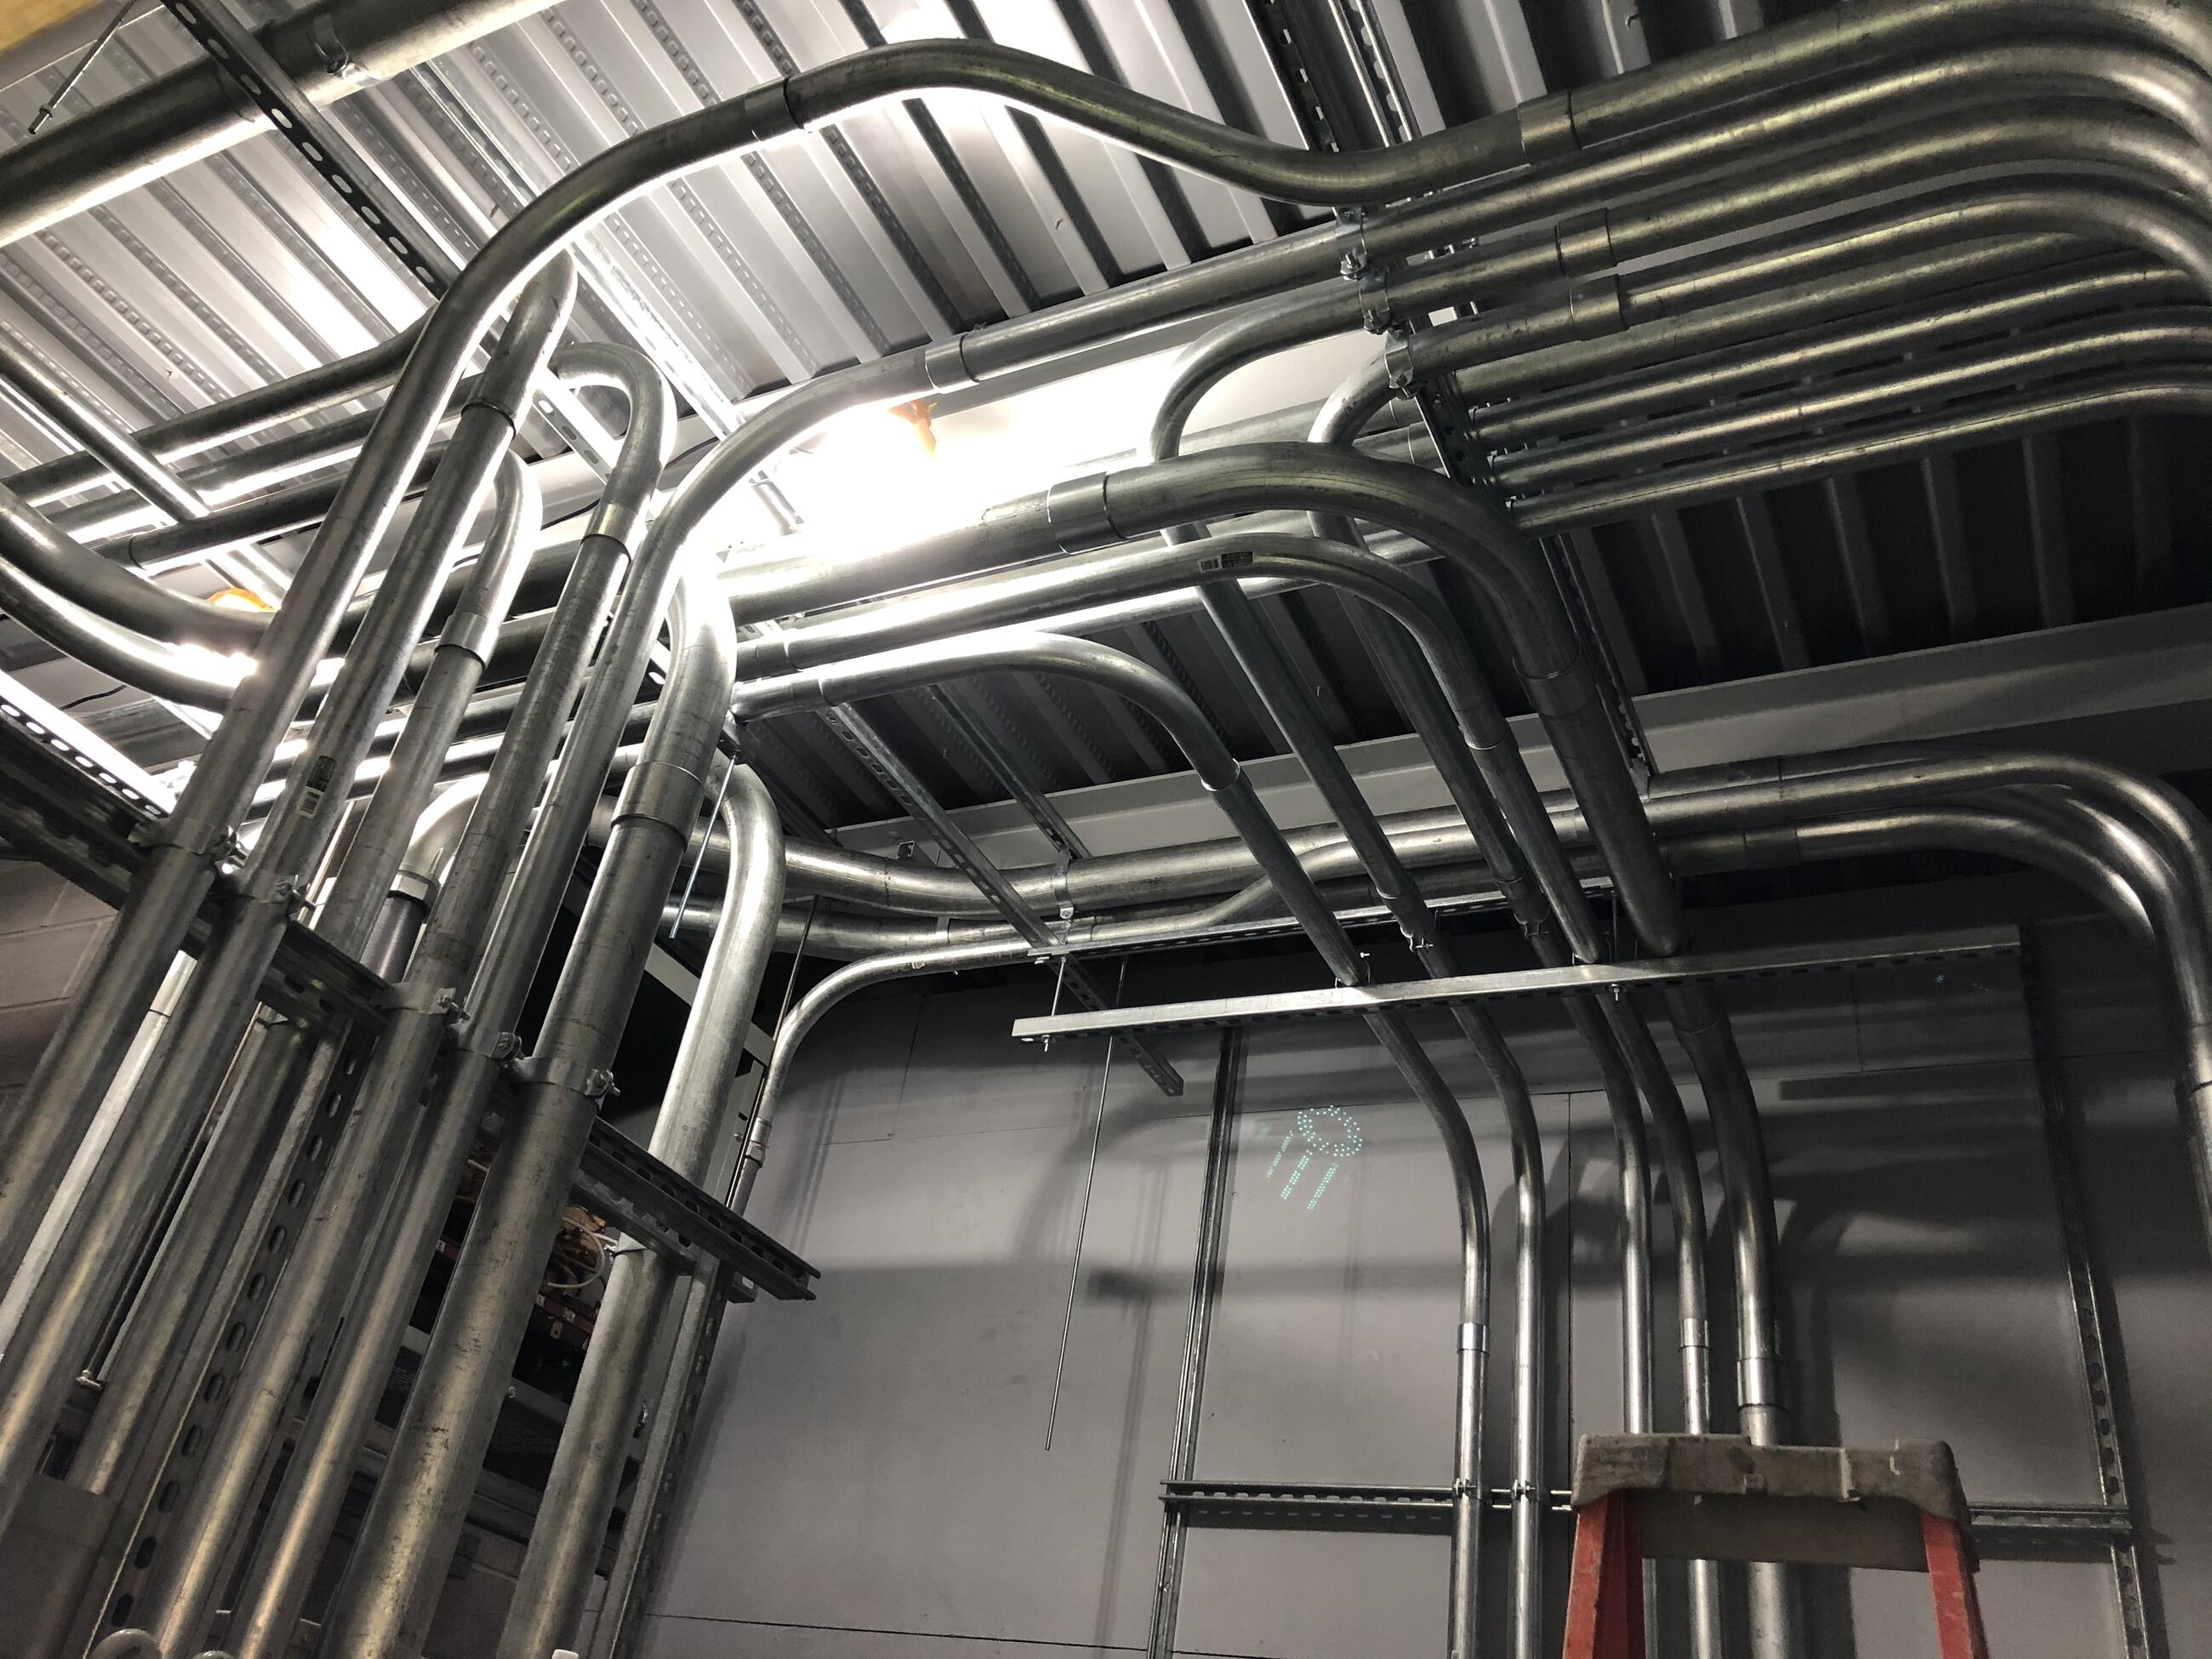 A bundle of steel pipes wrap from the wall to ceiling and back down on the other side